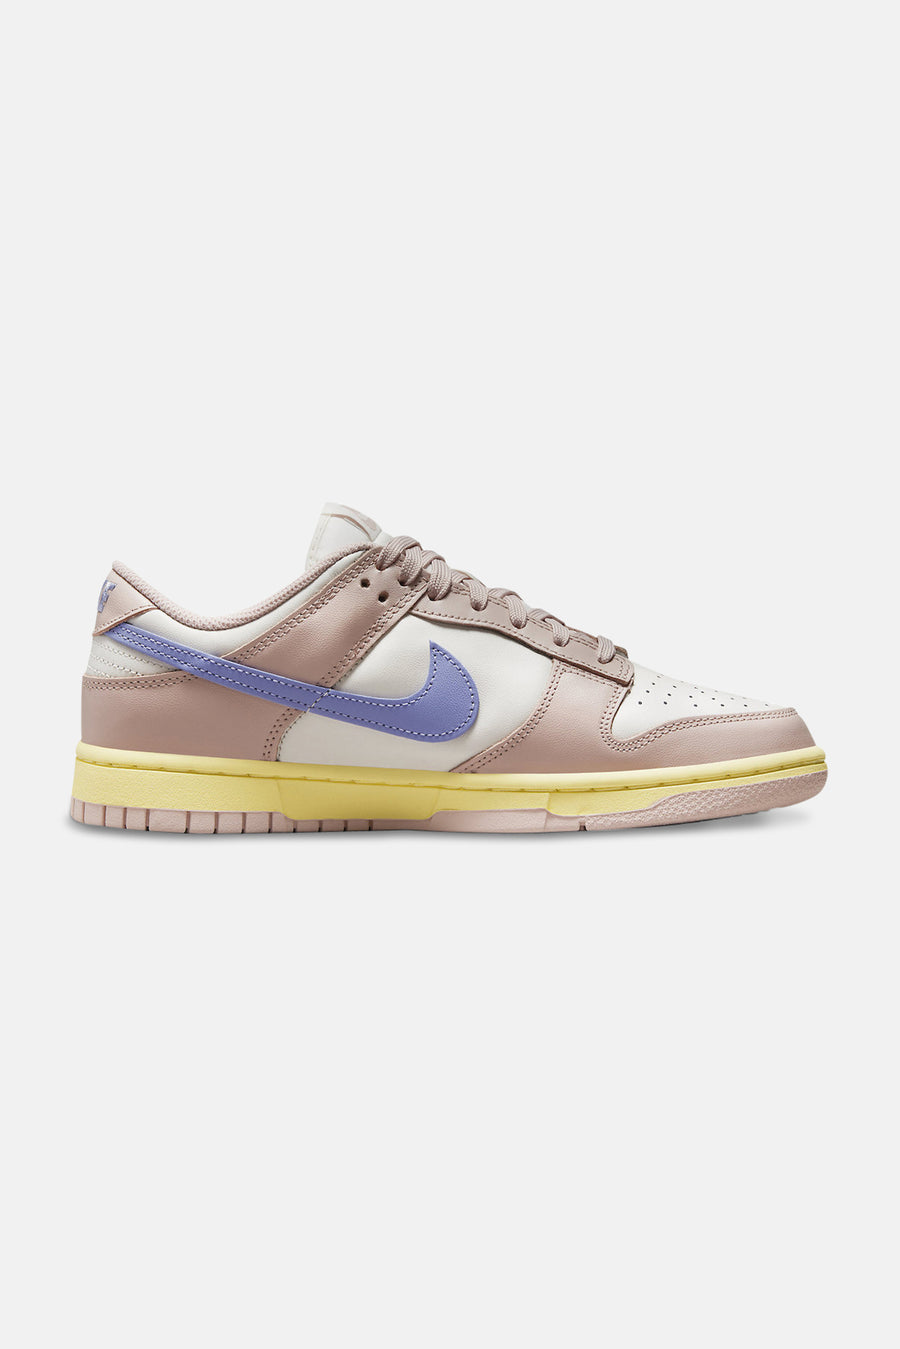 Women's Dunk Low Pink Oxford/Light Thistle